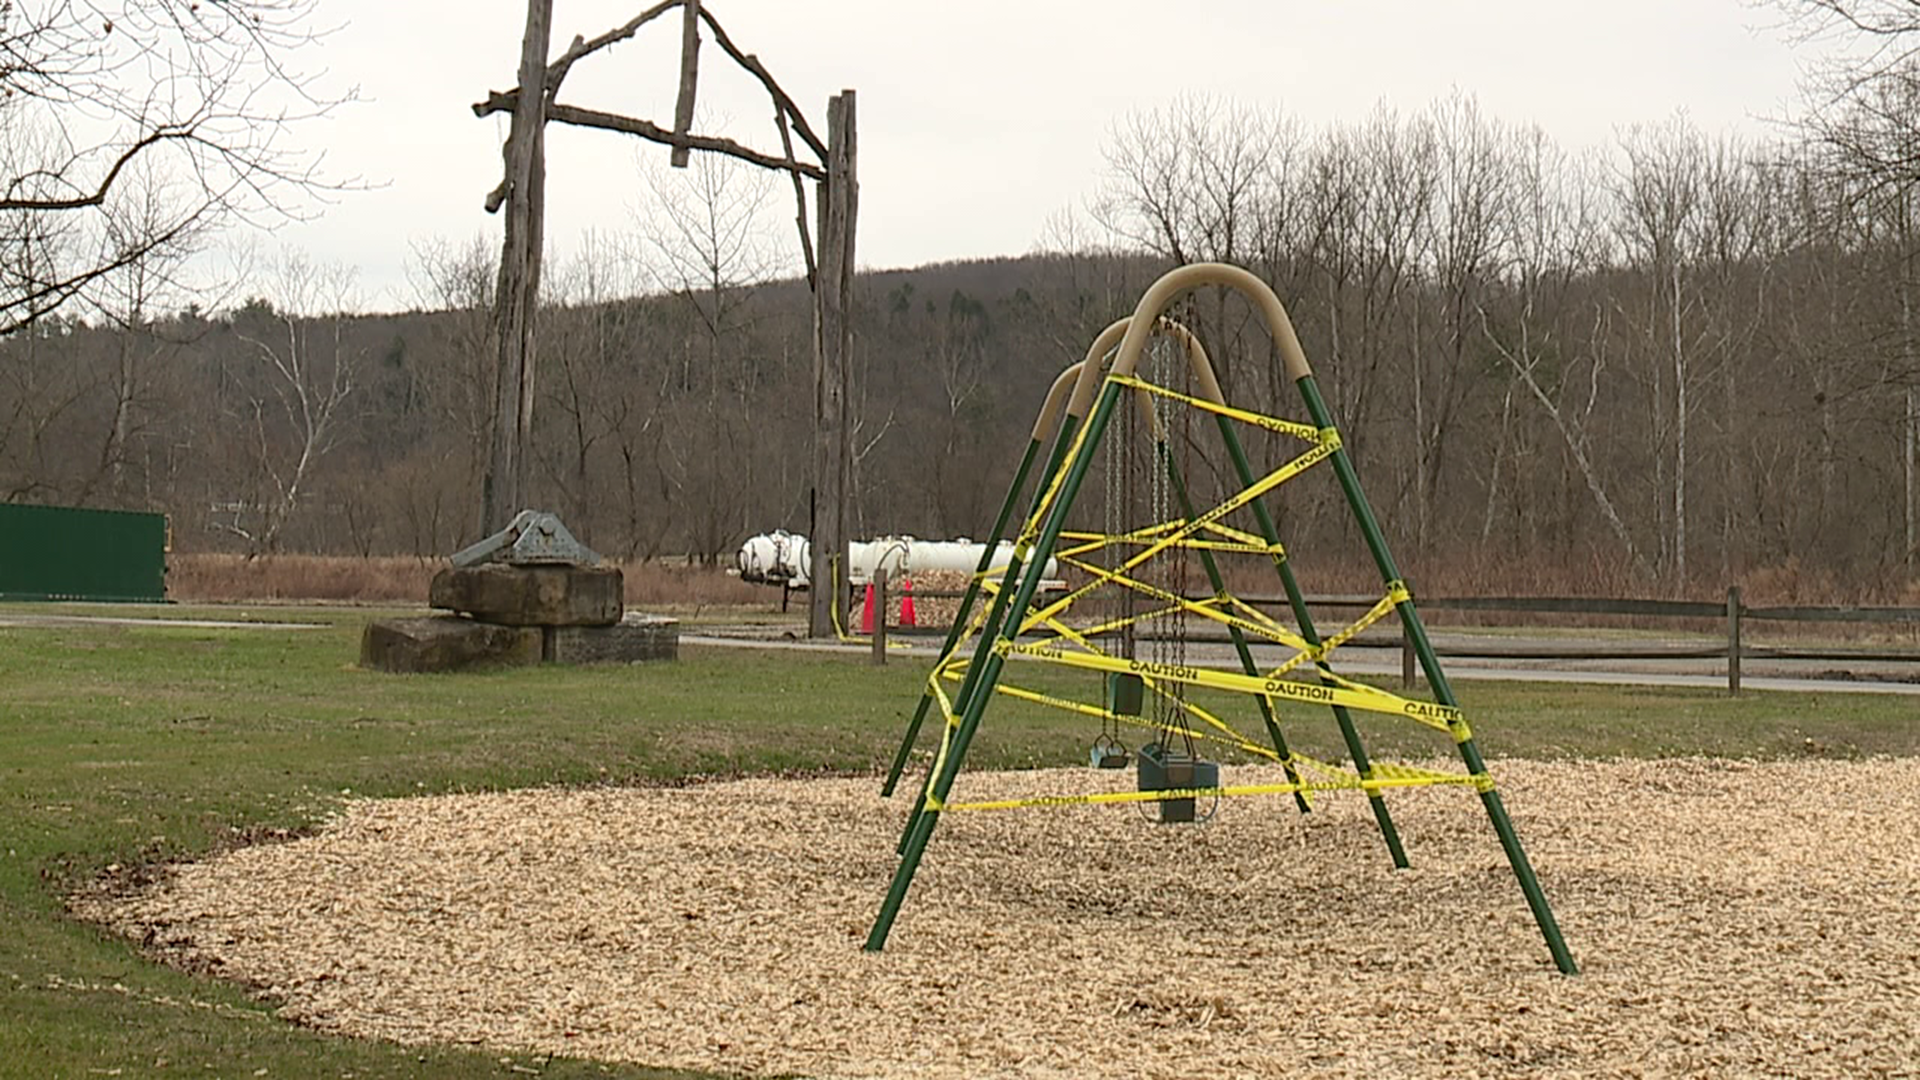 Playgrounds in the area have closed as communities try to stop the spread of coronavirus.